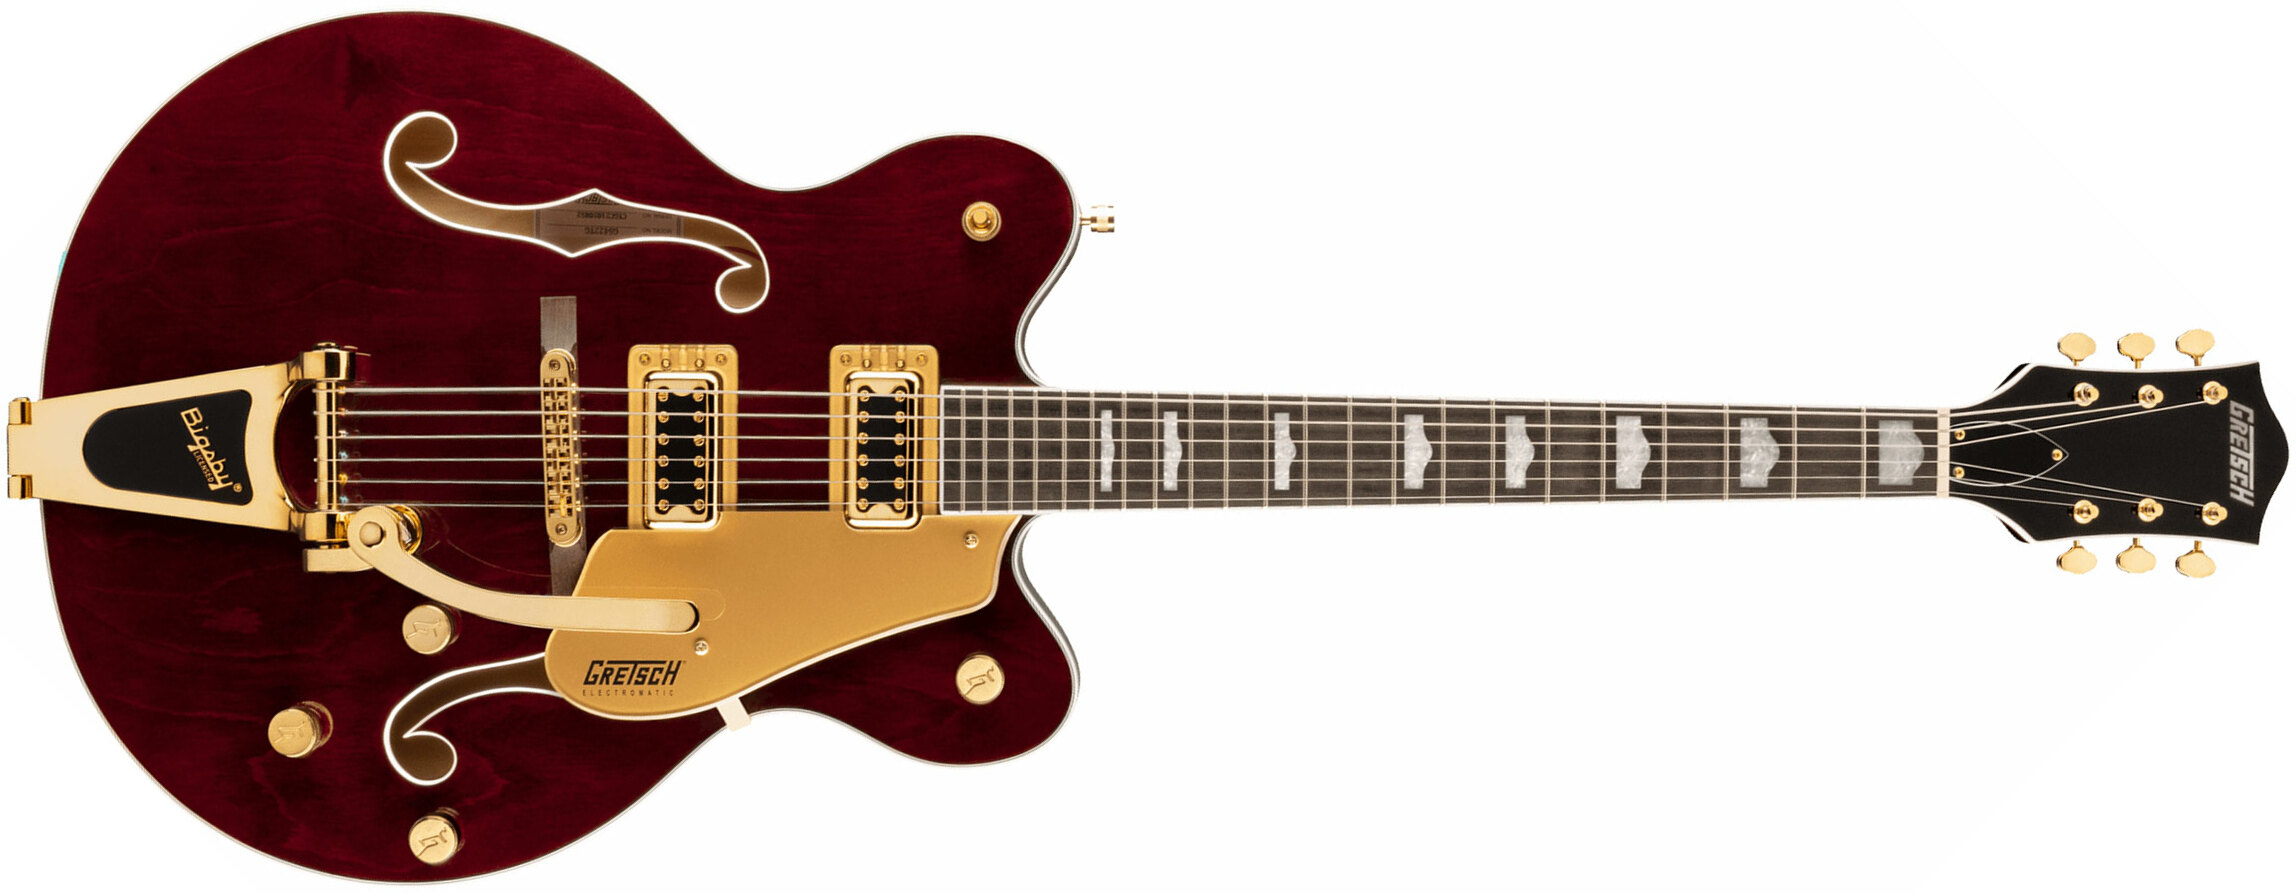 Gretsch G5422tg Electromatic Classic Hollow Body Dc Bigsby Hh Lau - Walnut Stain - Guitare Électrique 1/2 Caisse - Main picture